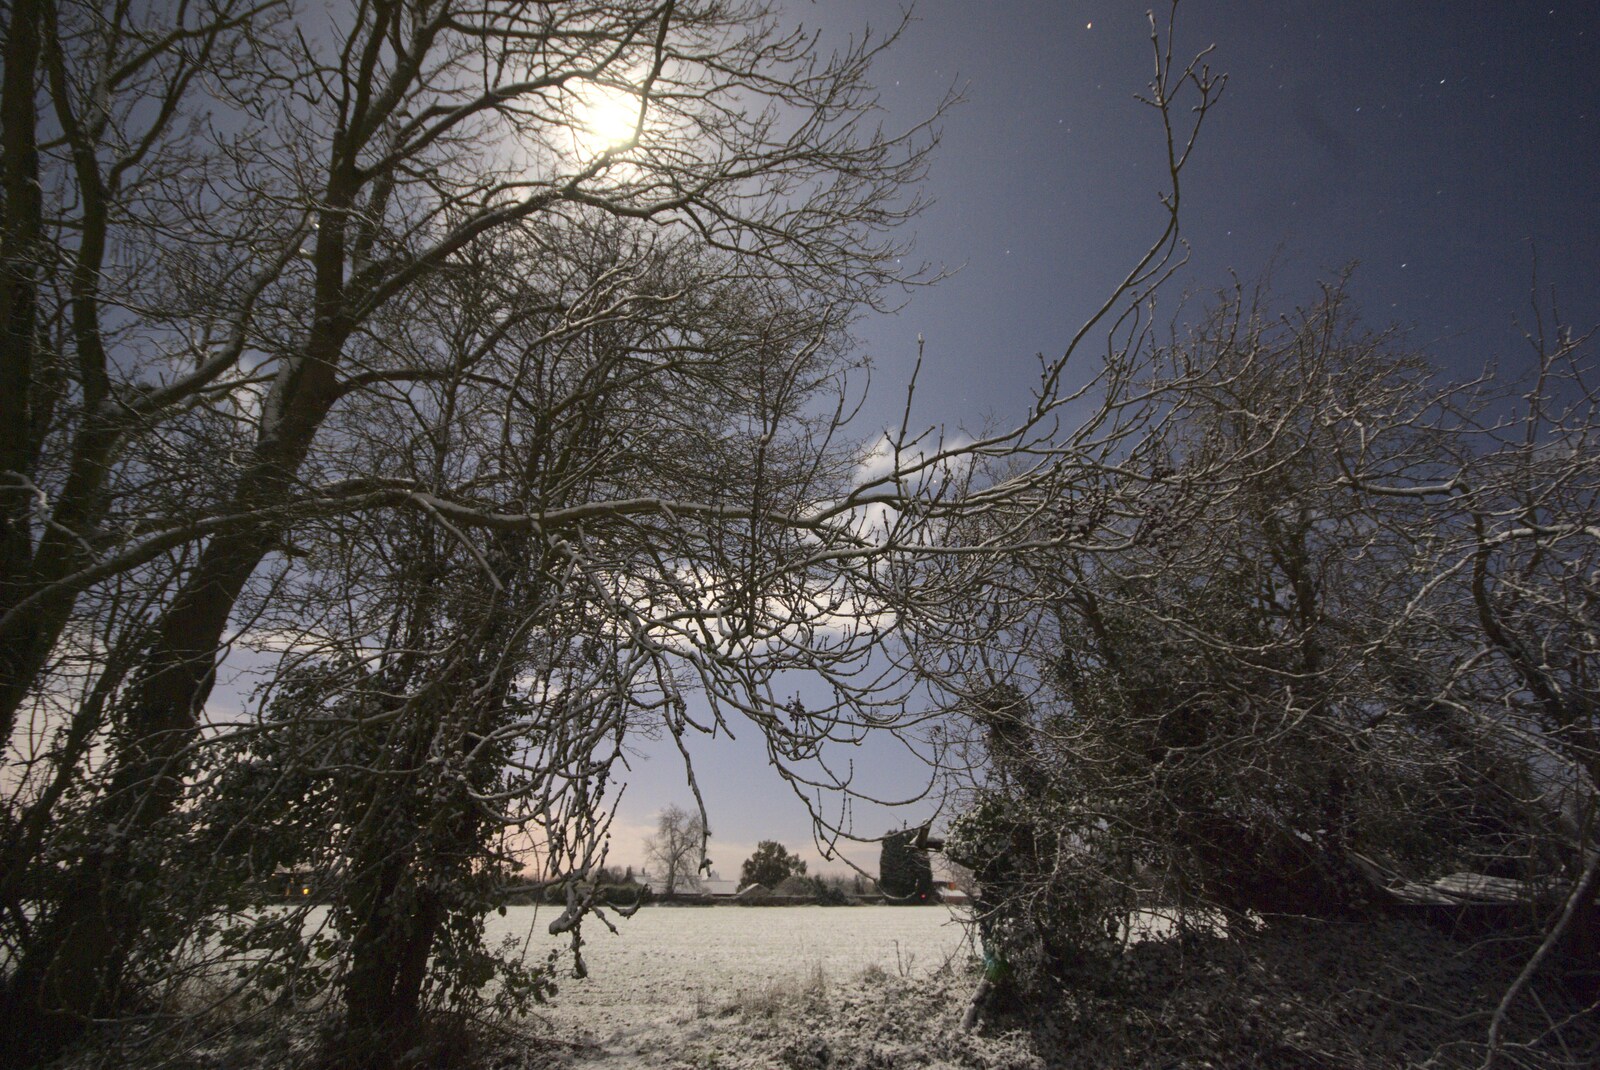 New Year's Eve at the Swan Inn, and Moonlight Photos, Brome, Suffolk - 31st December 2009: The moon through the hedge